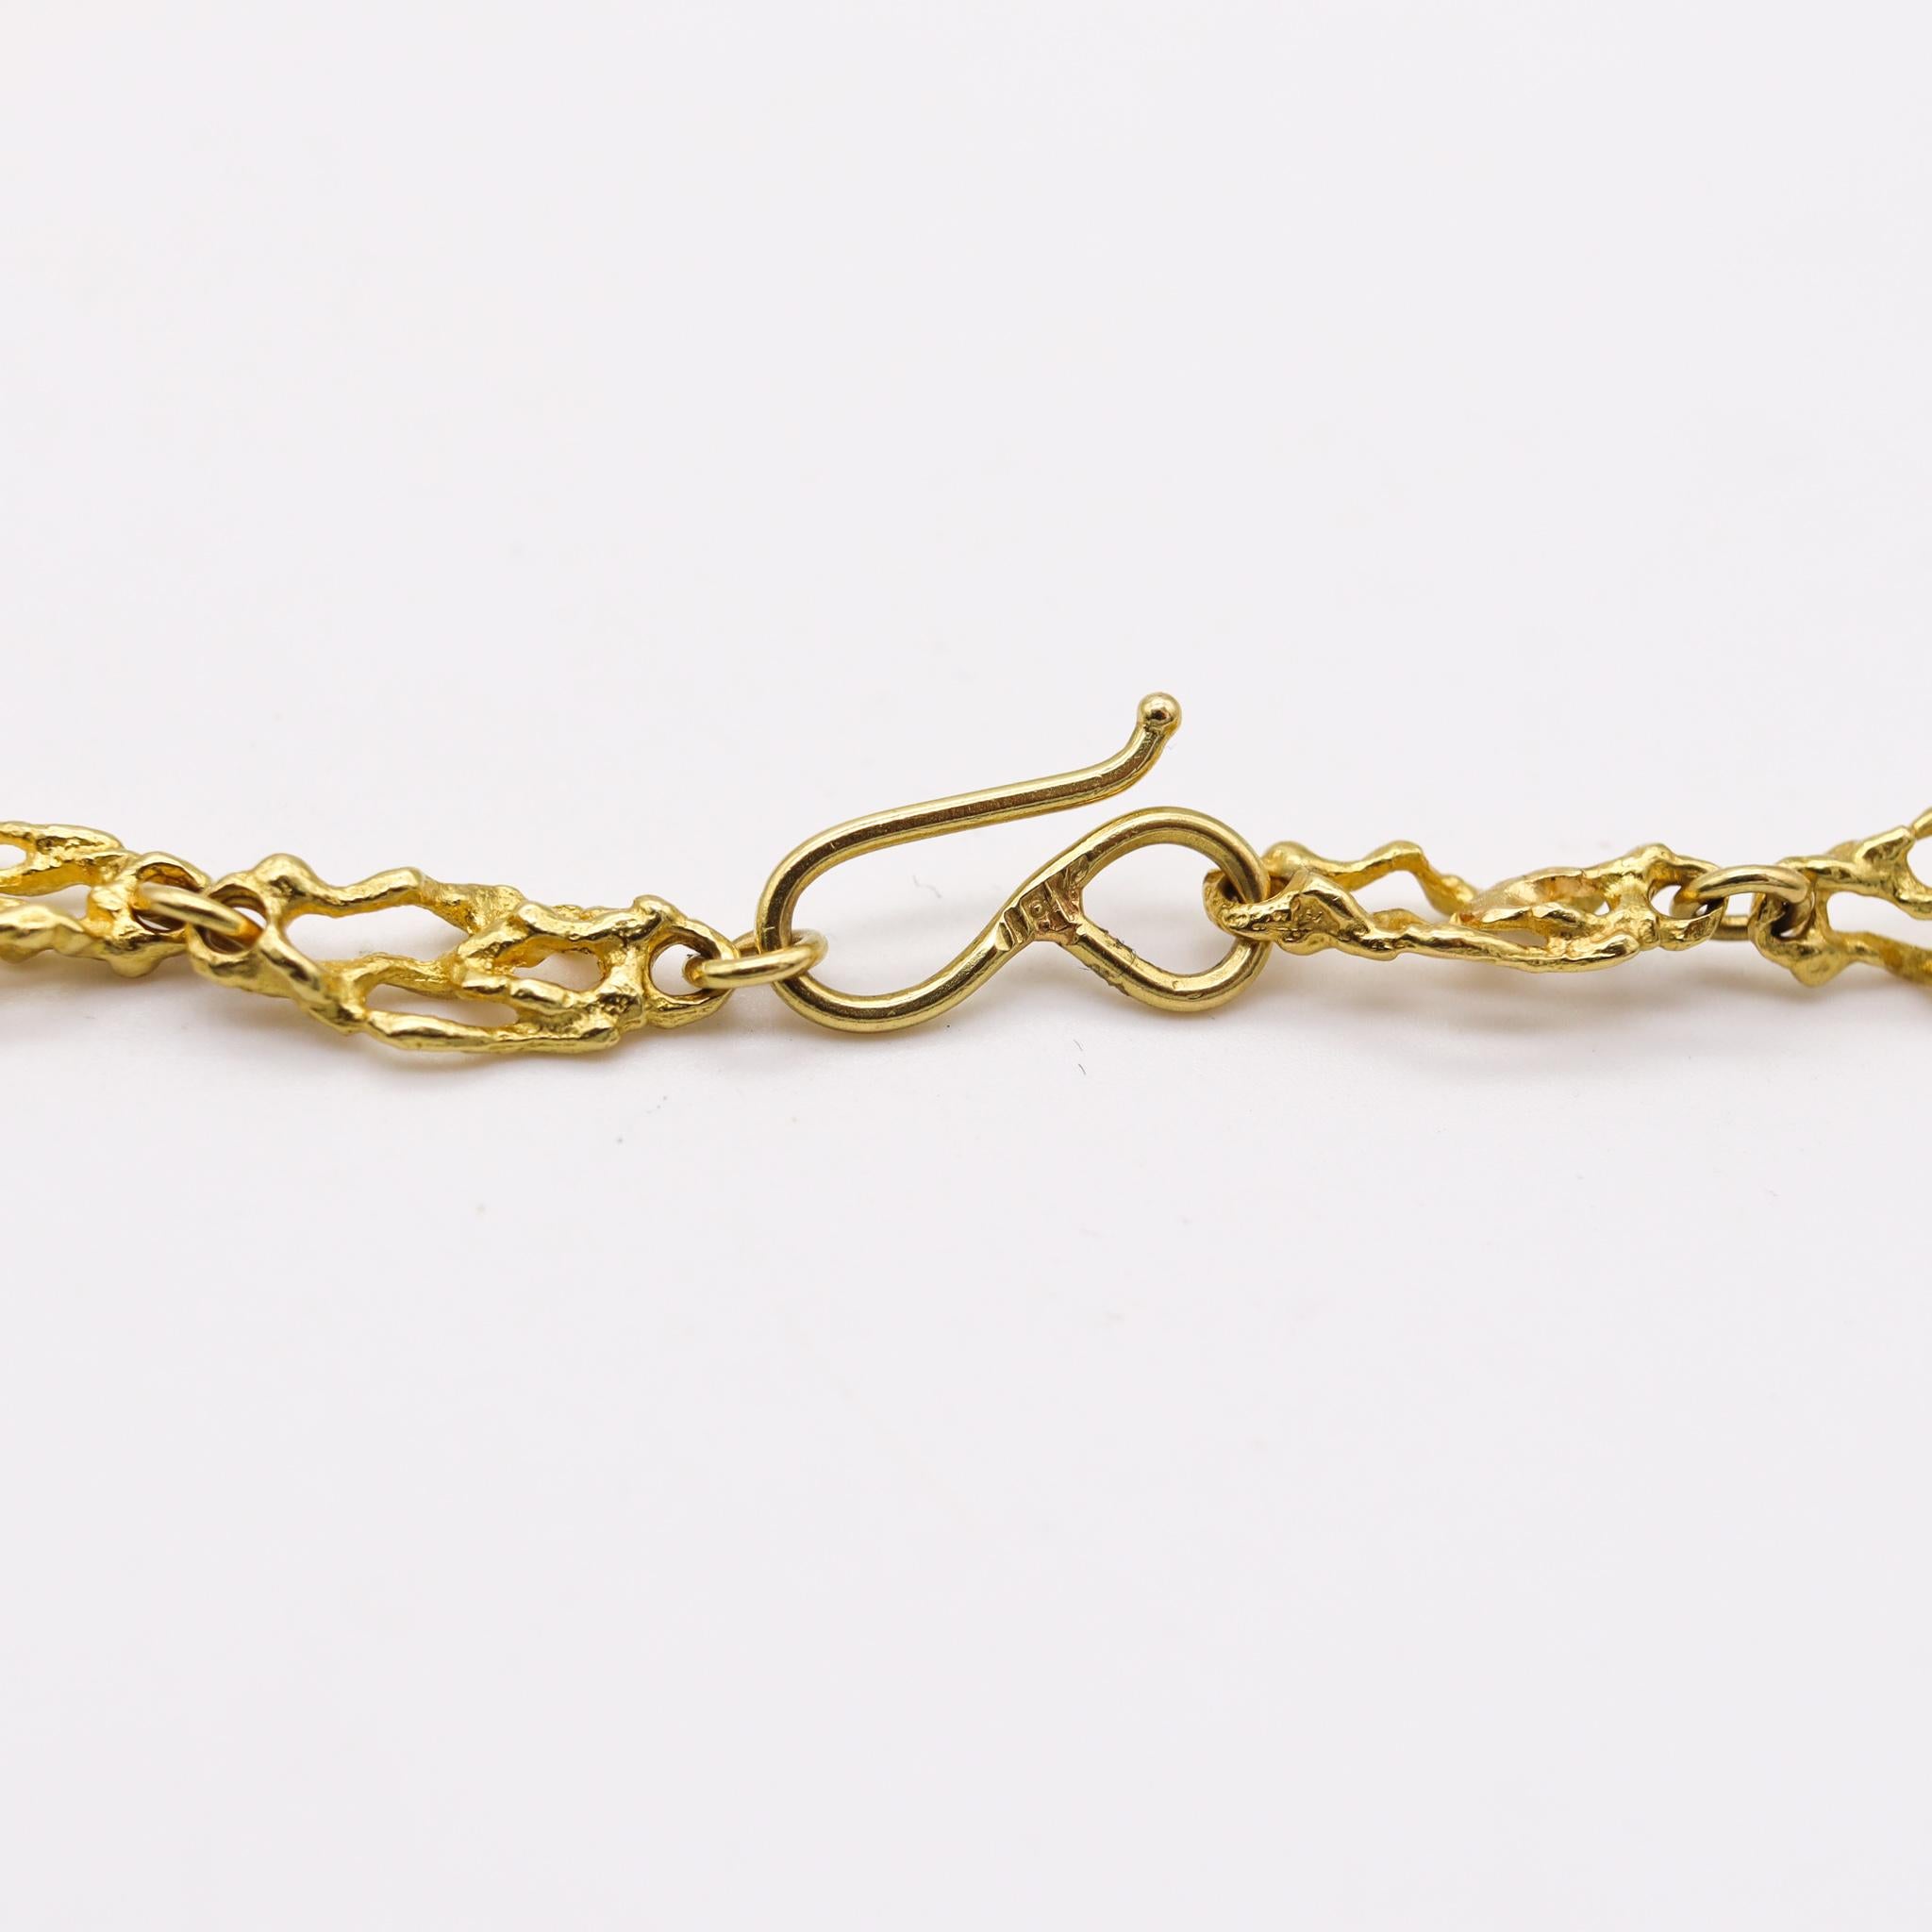 Retro 1970 Modernist Chain with Organic Textured Links in 18Kt Yellow Gold For Sale 2